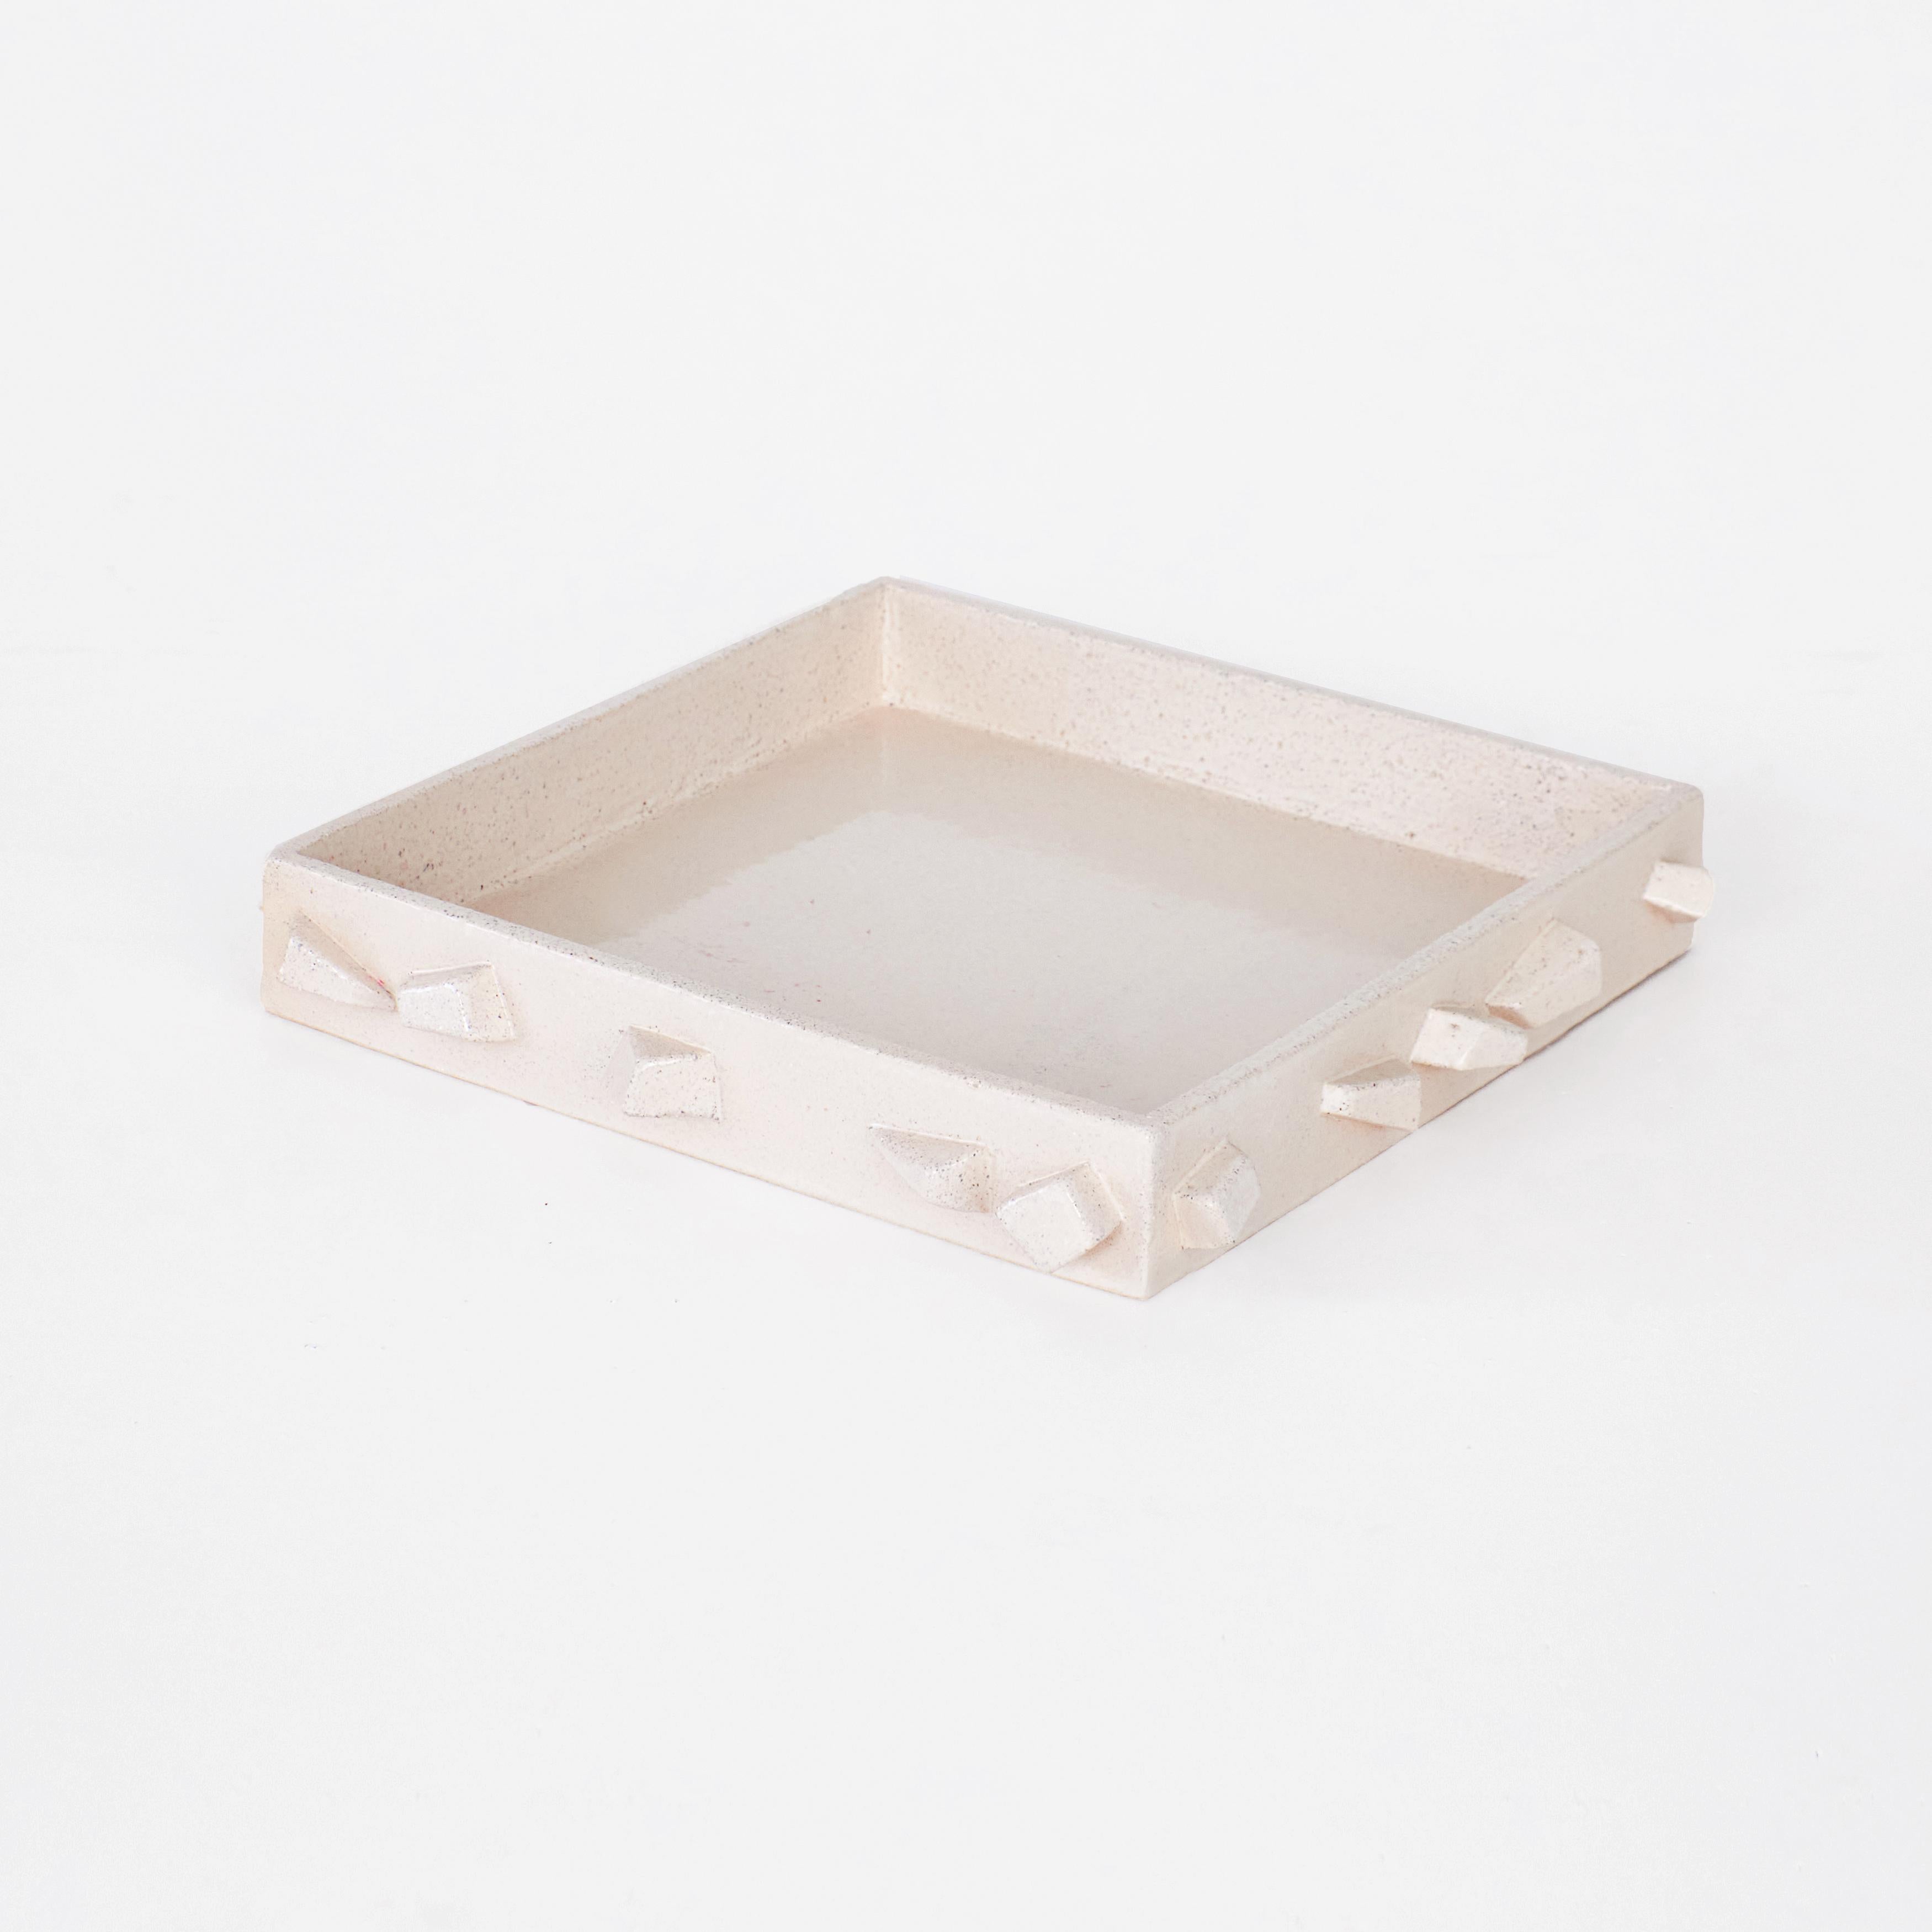 For Rachel tray in cream by Project 213A
Dimensions: D 33 x W 33 x H 5.5 cm
Materials: Ceramic. 

Hand-sculpted ceramic tray with hand made rectangle shaped elements. This large sized tray is finished with a bespoke cream glaze that reveals the